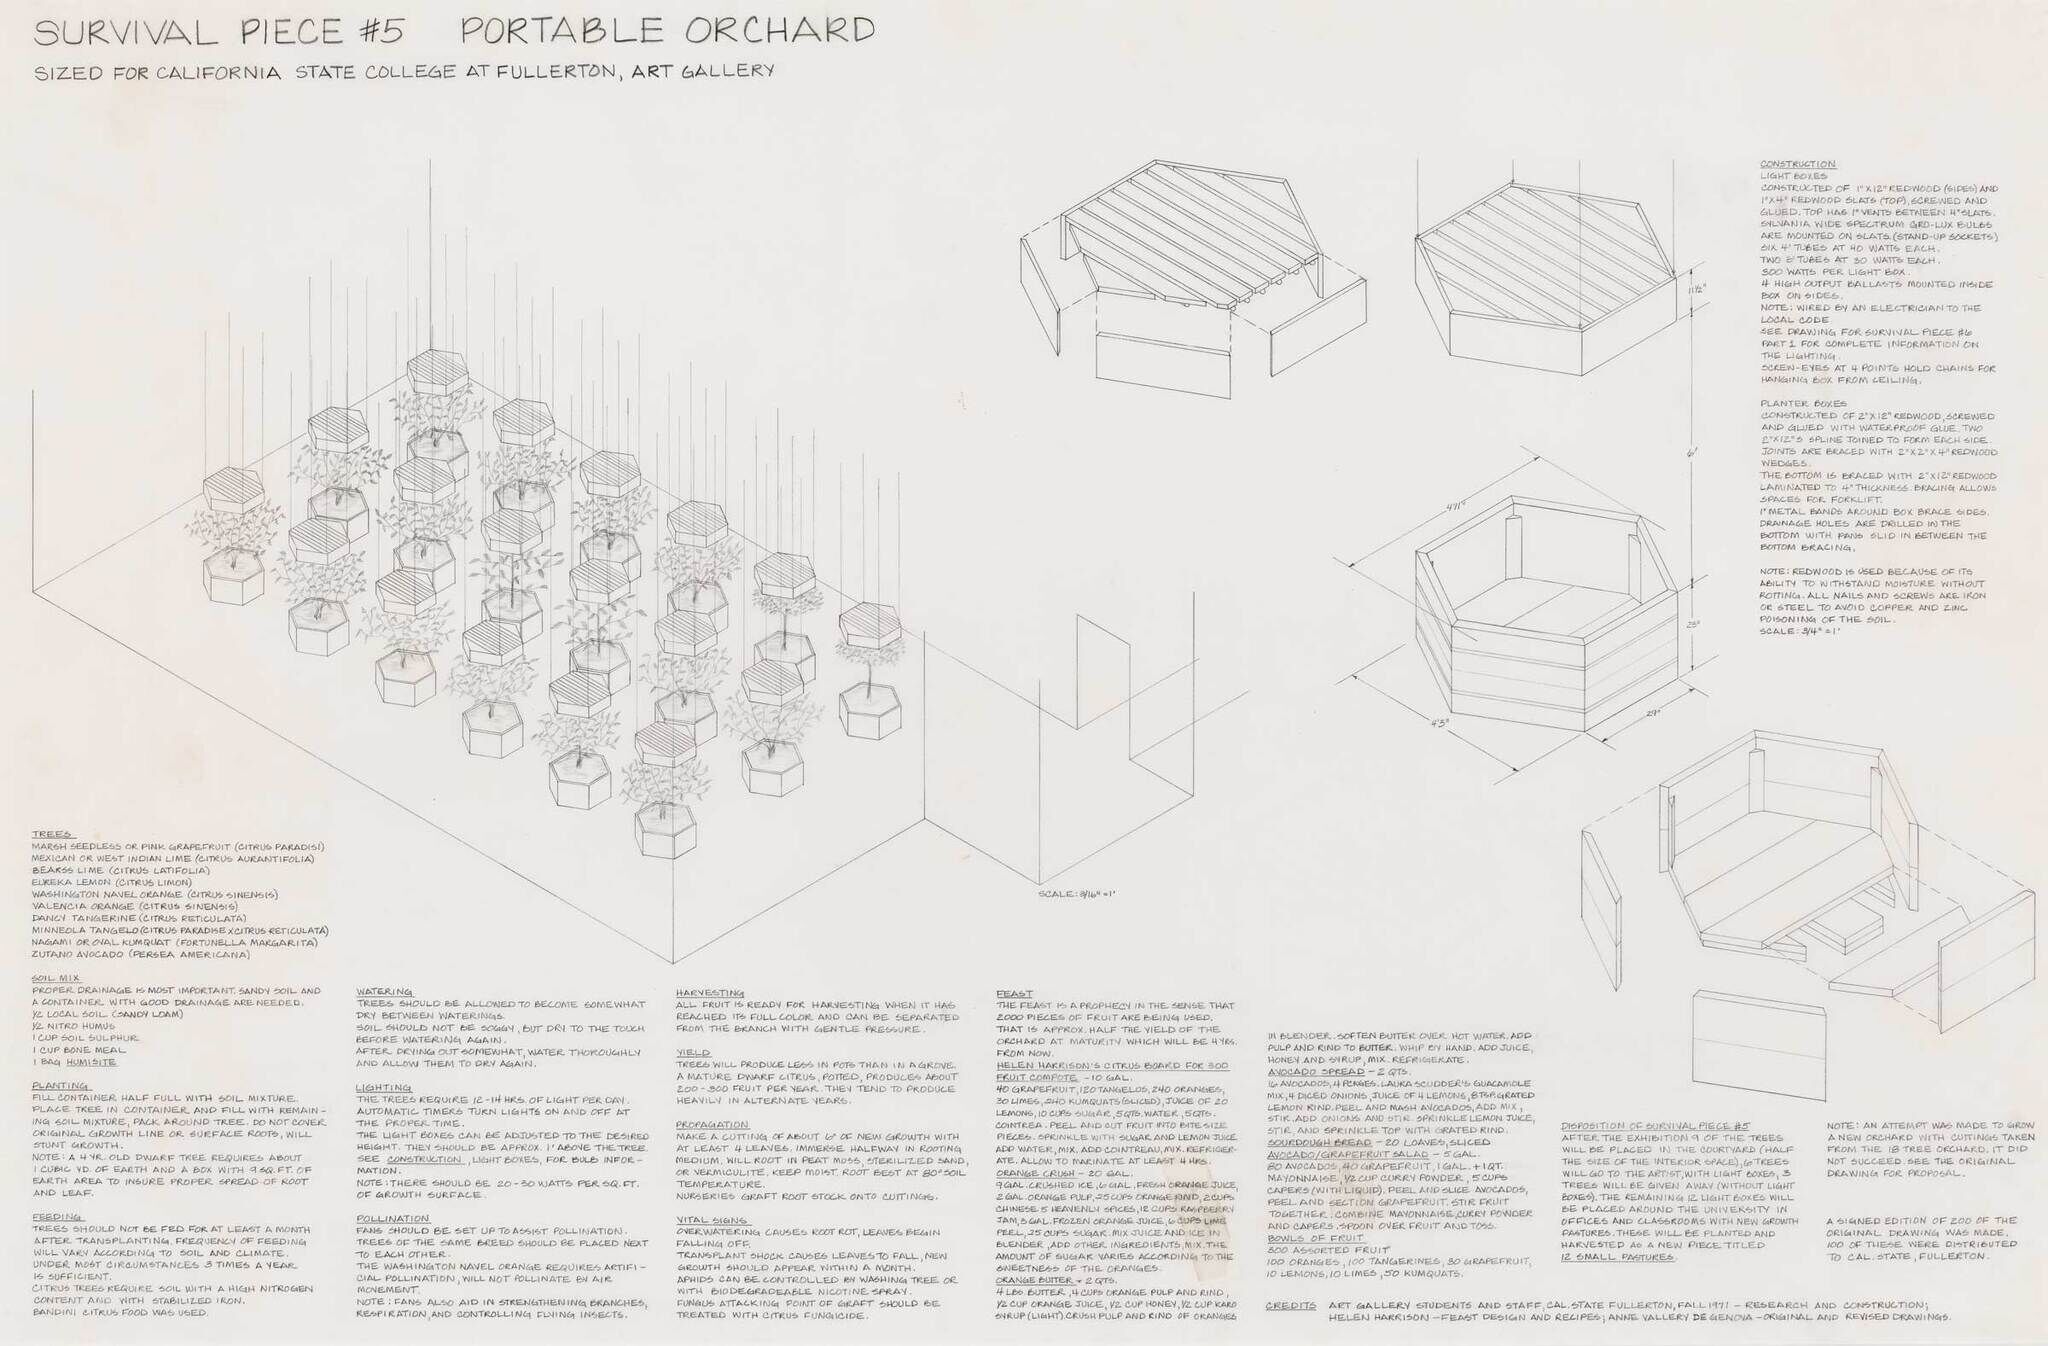 Diagram titled "Survival Piece #5 Portable Orchard" for California State College at Fullerton Art Gallery, showing tree layout, planter construction, and instructions.